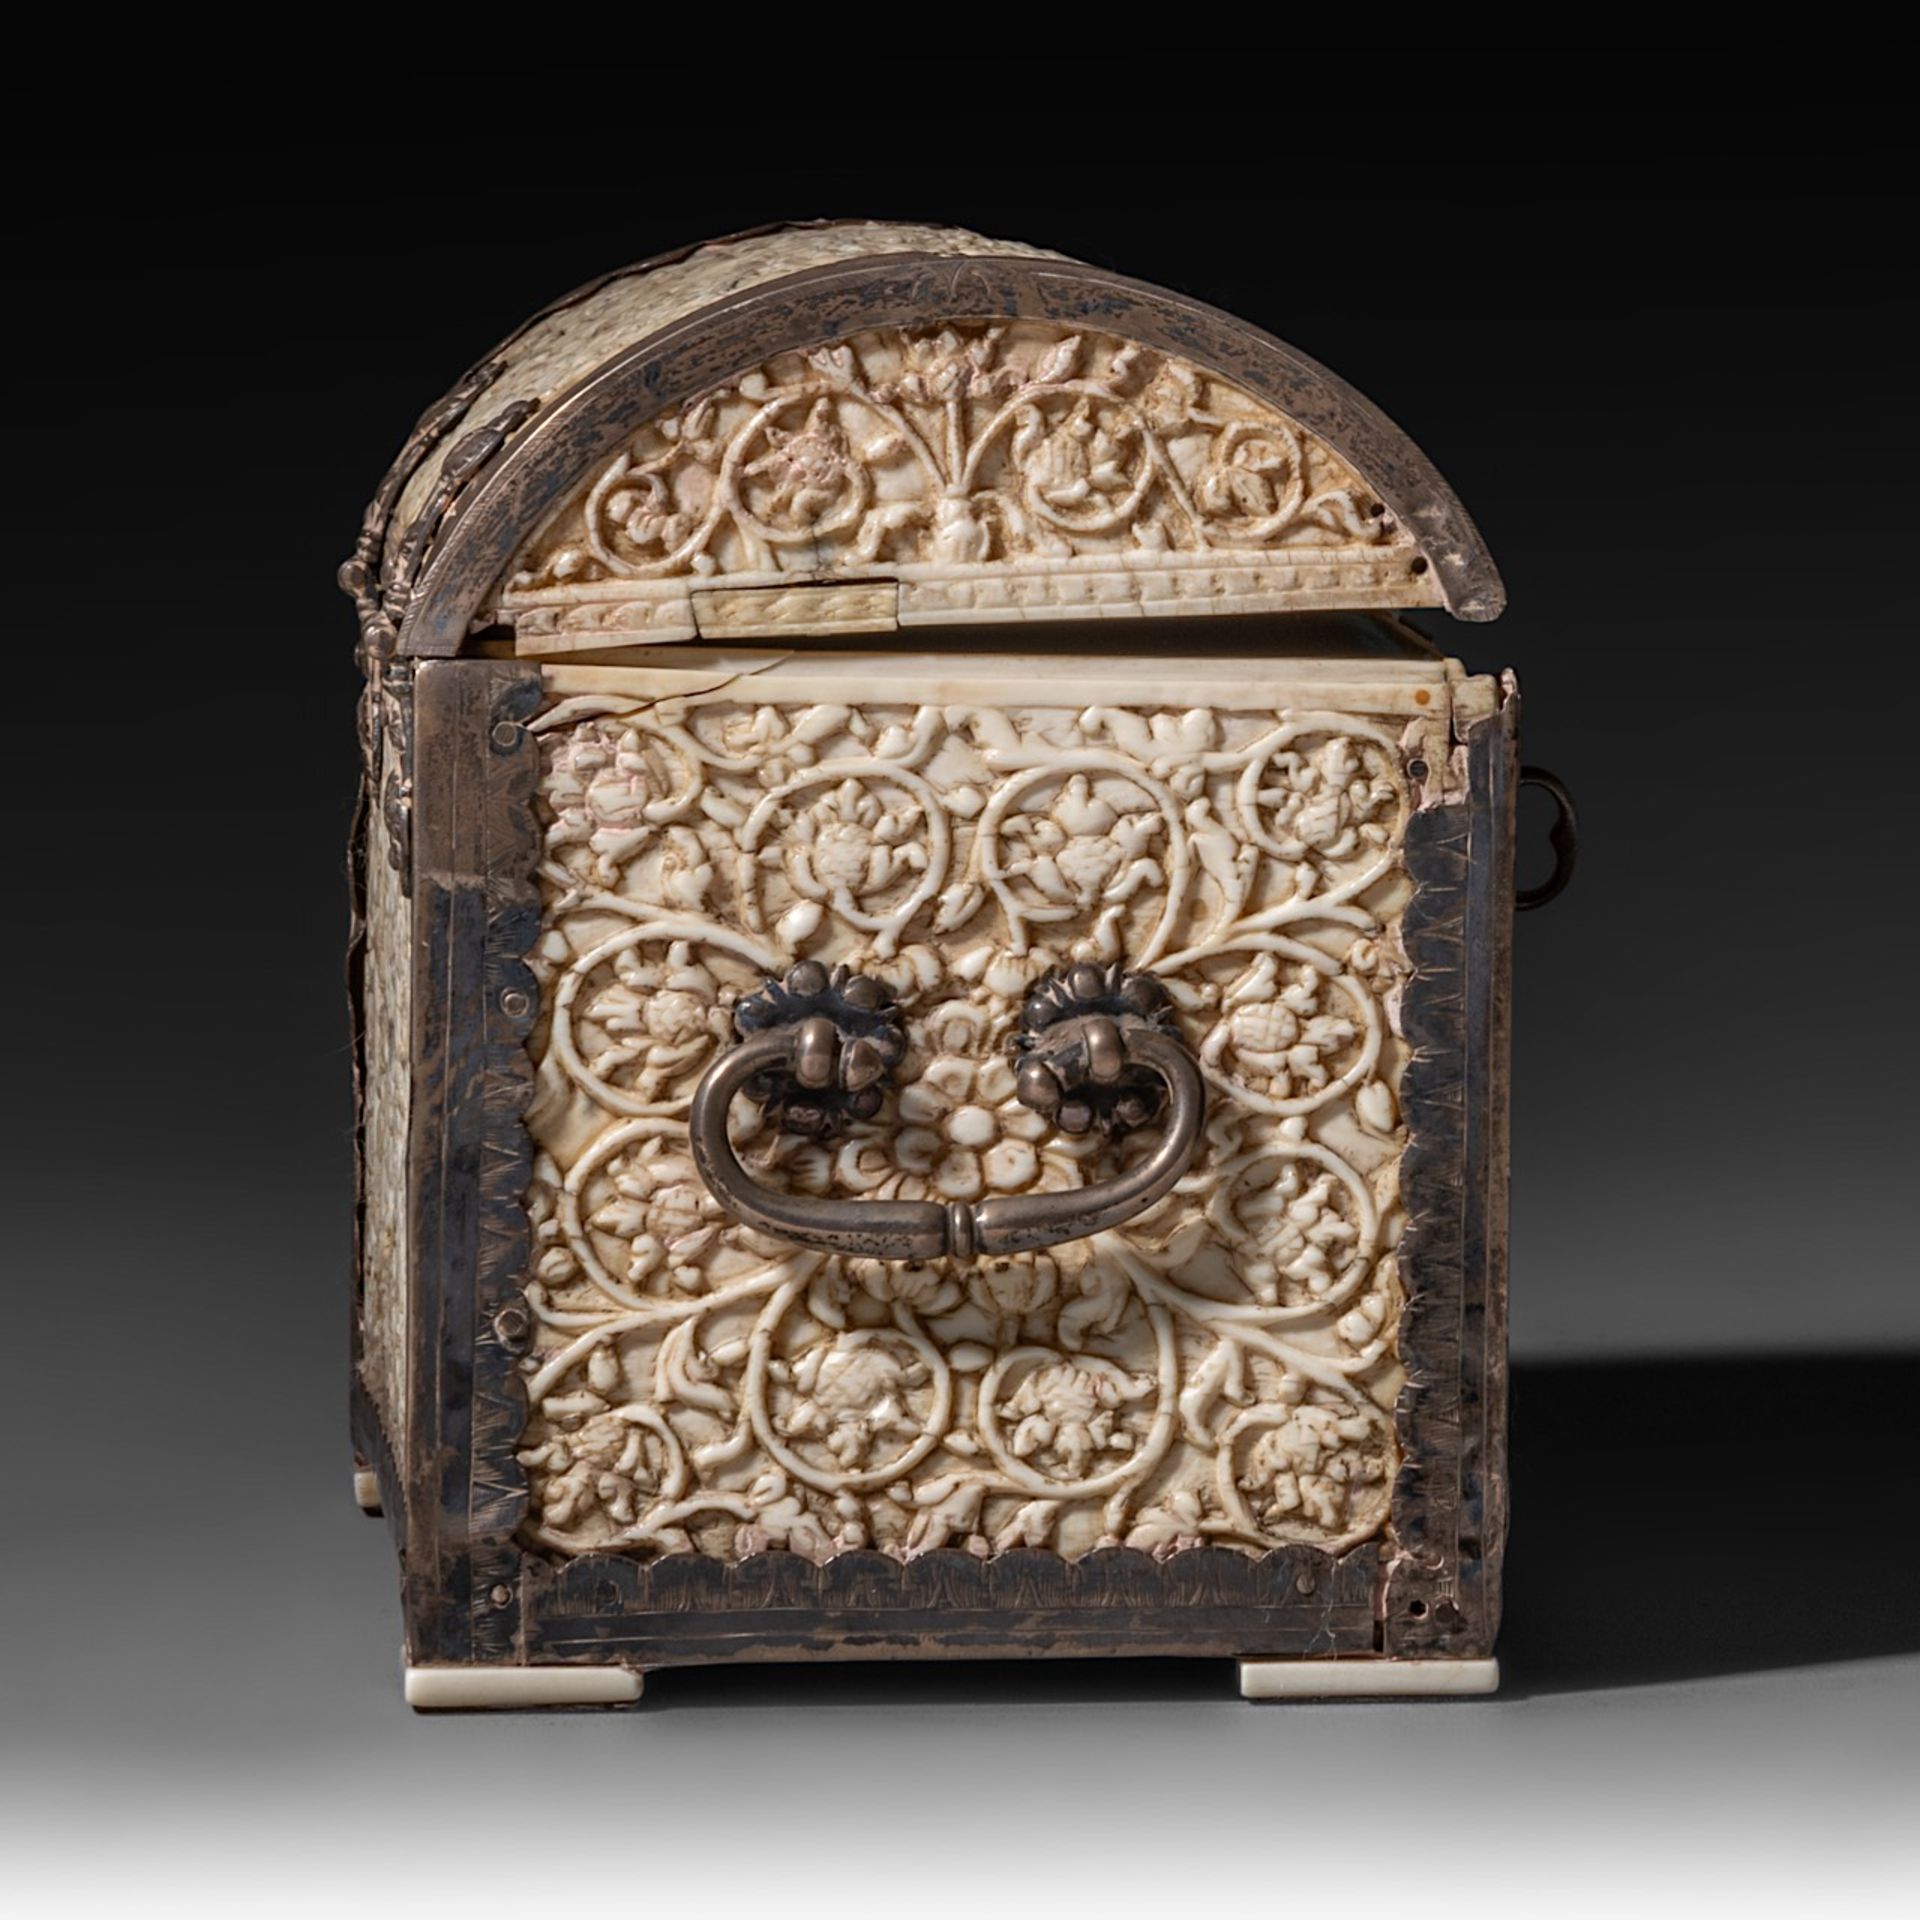 A 17th/18th-century Sinhalese (Sri Lanka) ivory jewelry casket, H 13,5 - W 19,3 - D 10,1 cm / total - Image 6 of 11